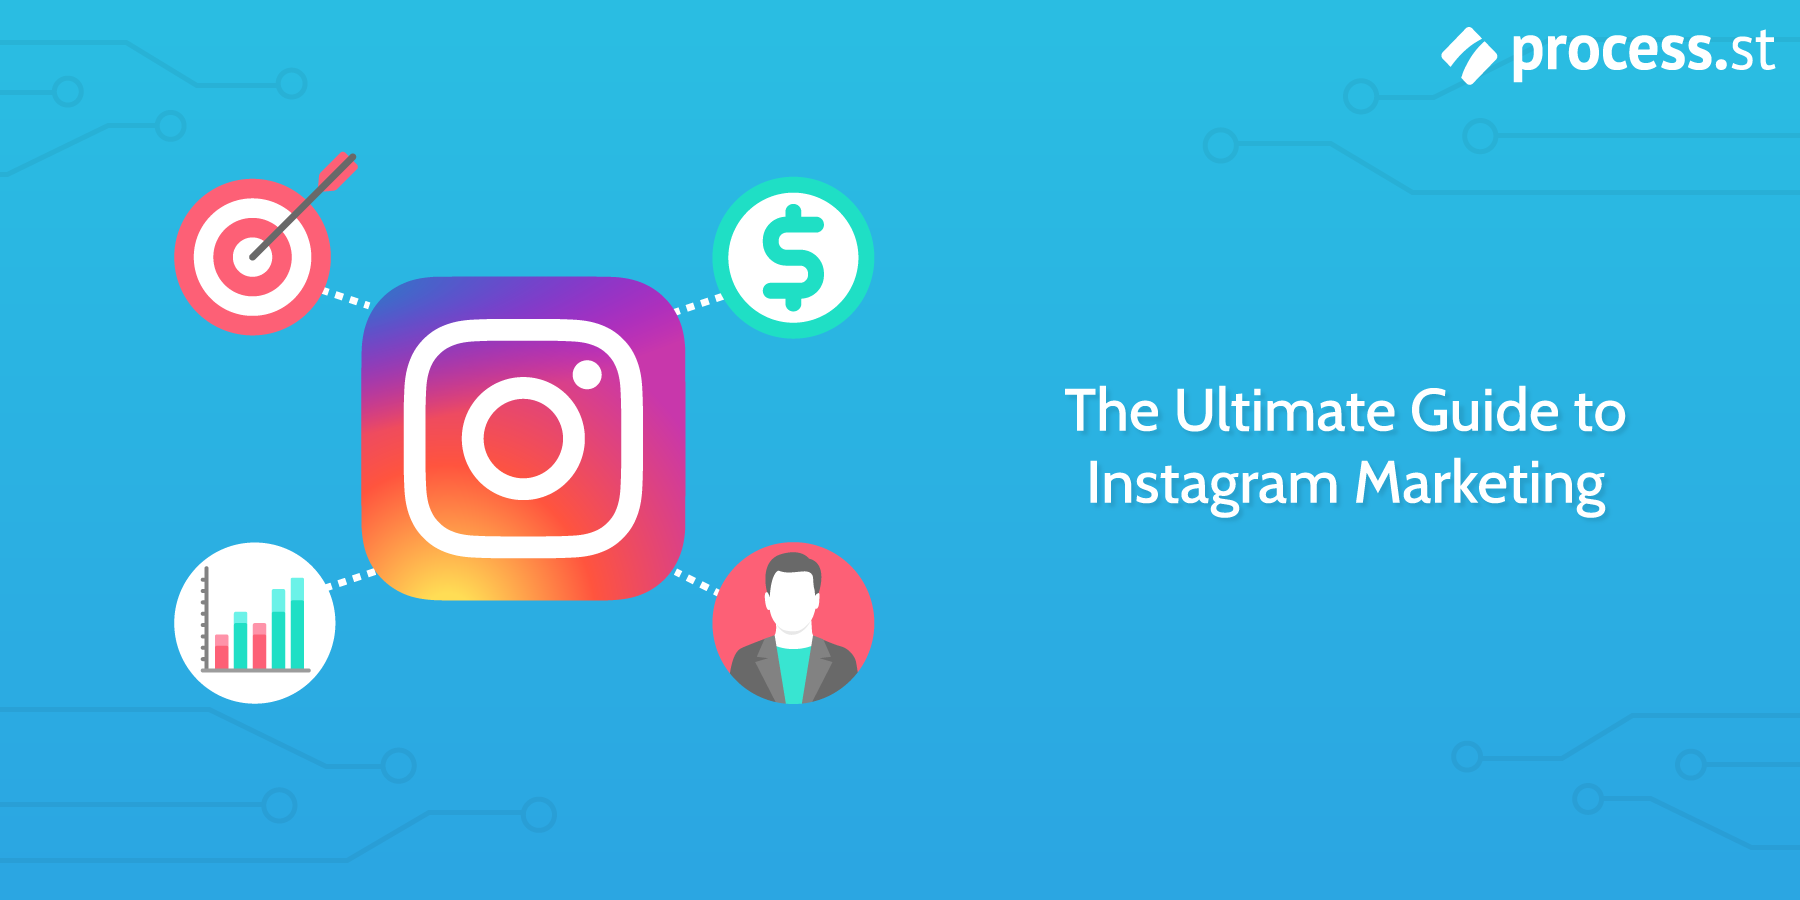 How to Market on Instagram